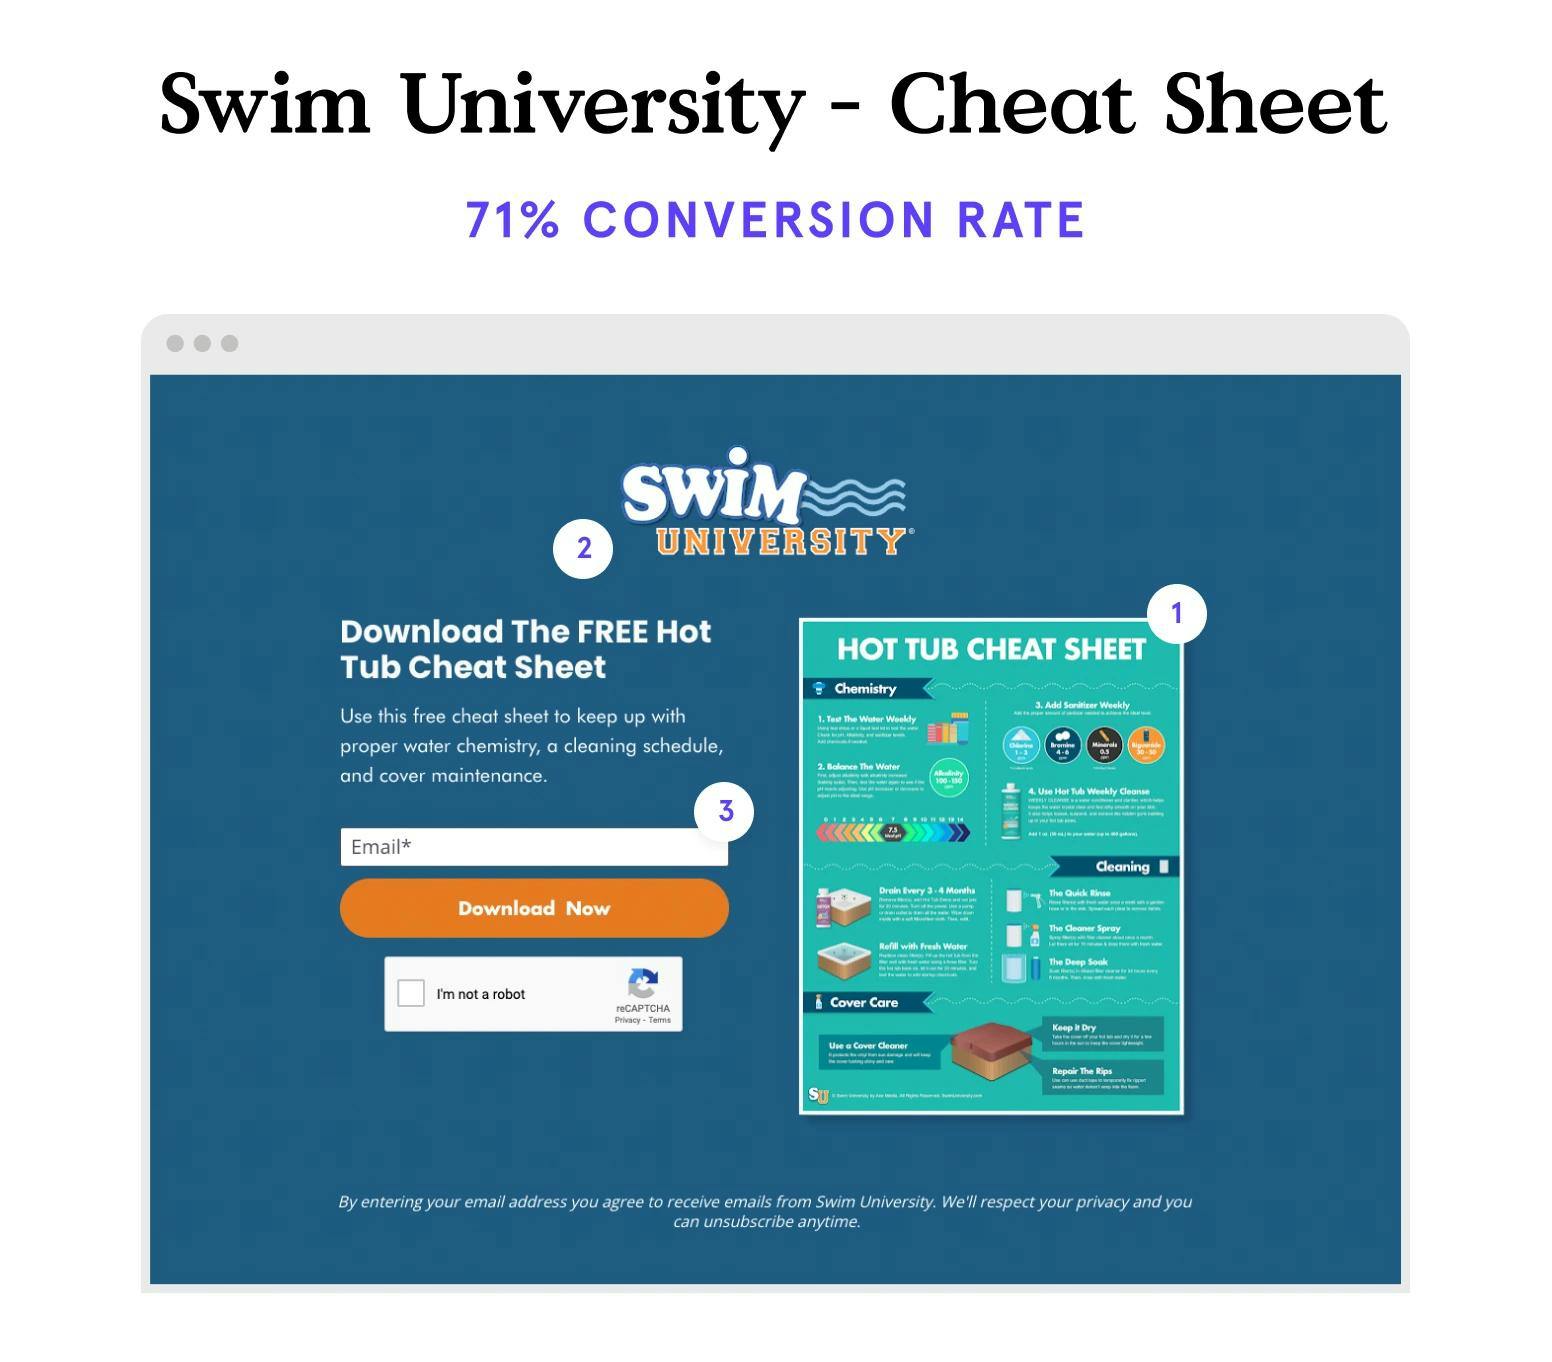 Cheat sheet lead generation landing page example